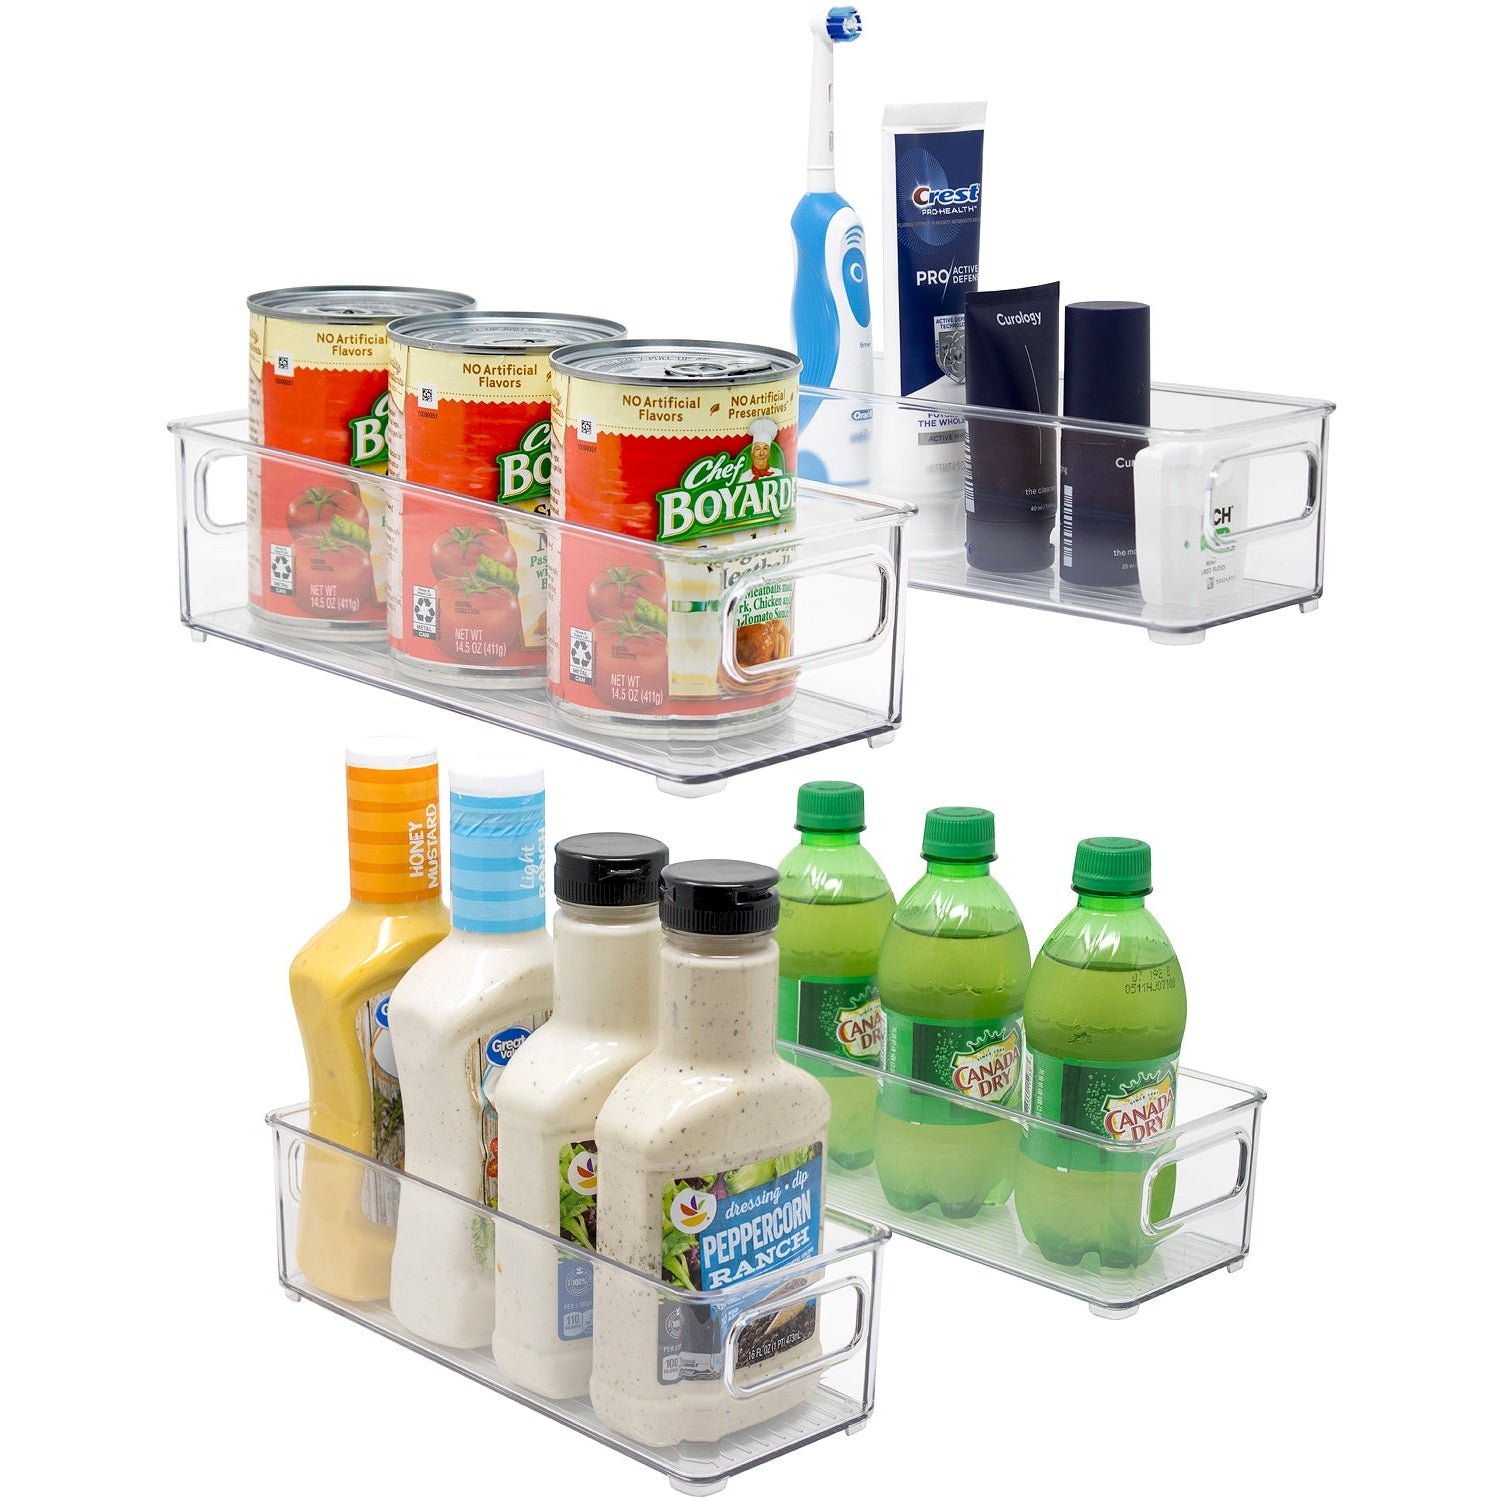 Narrow Pantry Container Bins